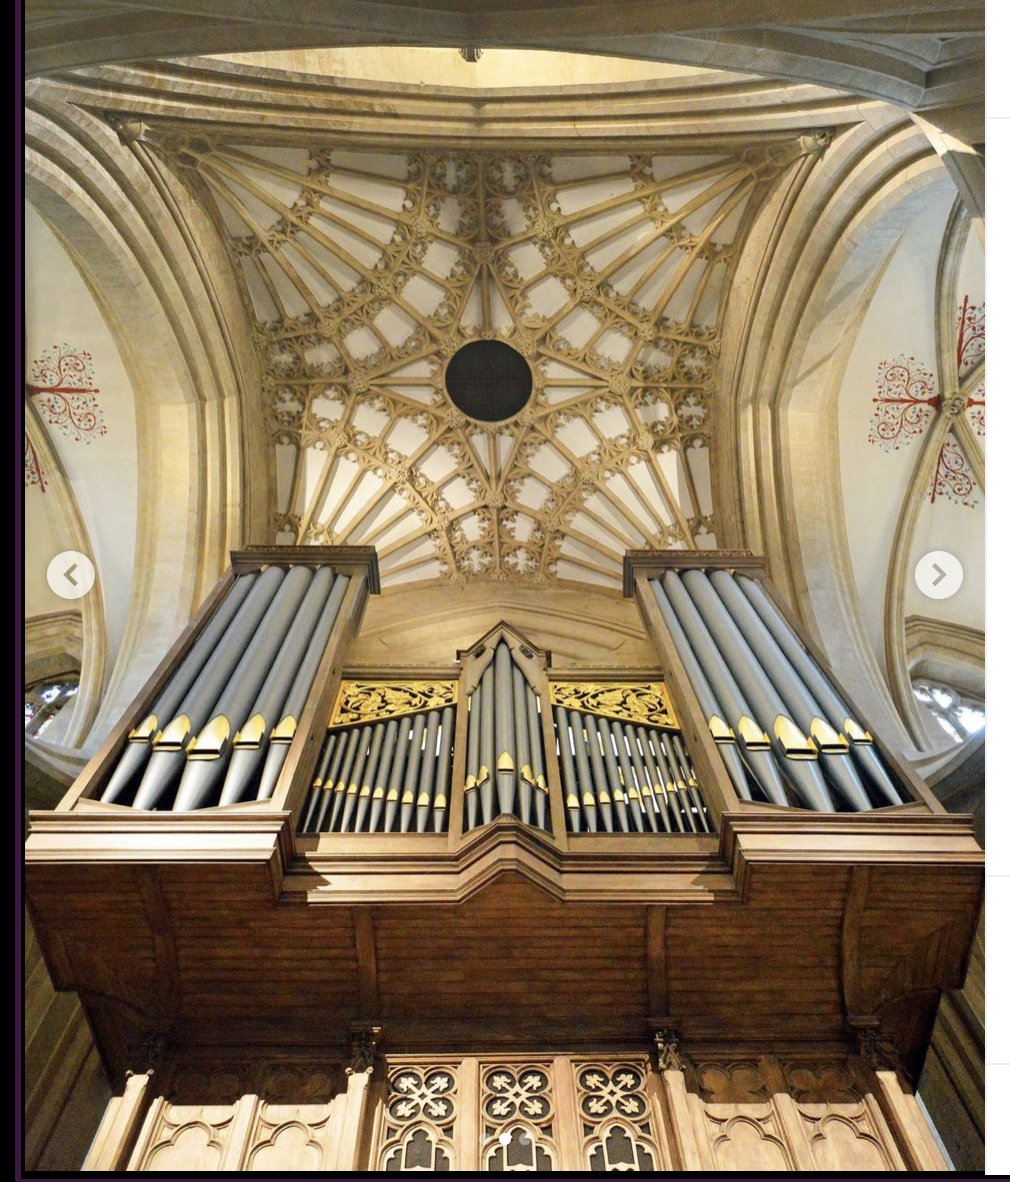 Not only are the Cathedral windows beautiful, the floors and ceilings of theses magnificent buildings are intricate in Cymatic patterns as well as well. Another topic on frequency and healing I'm reading about is the church organs. These amazing healing devices much like the